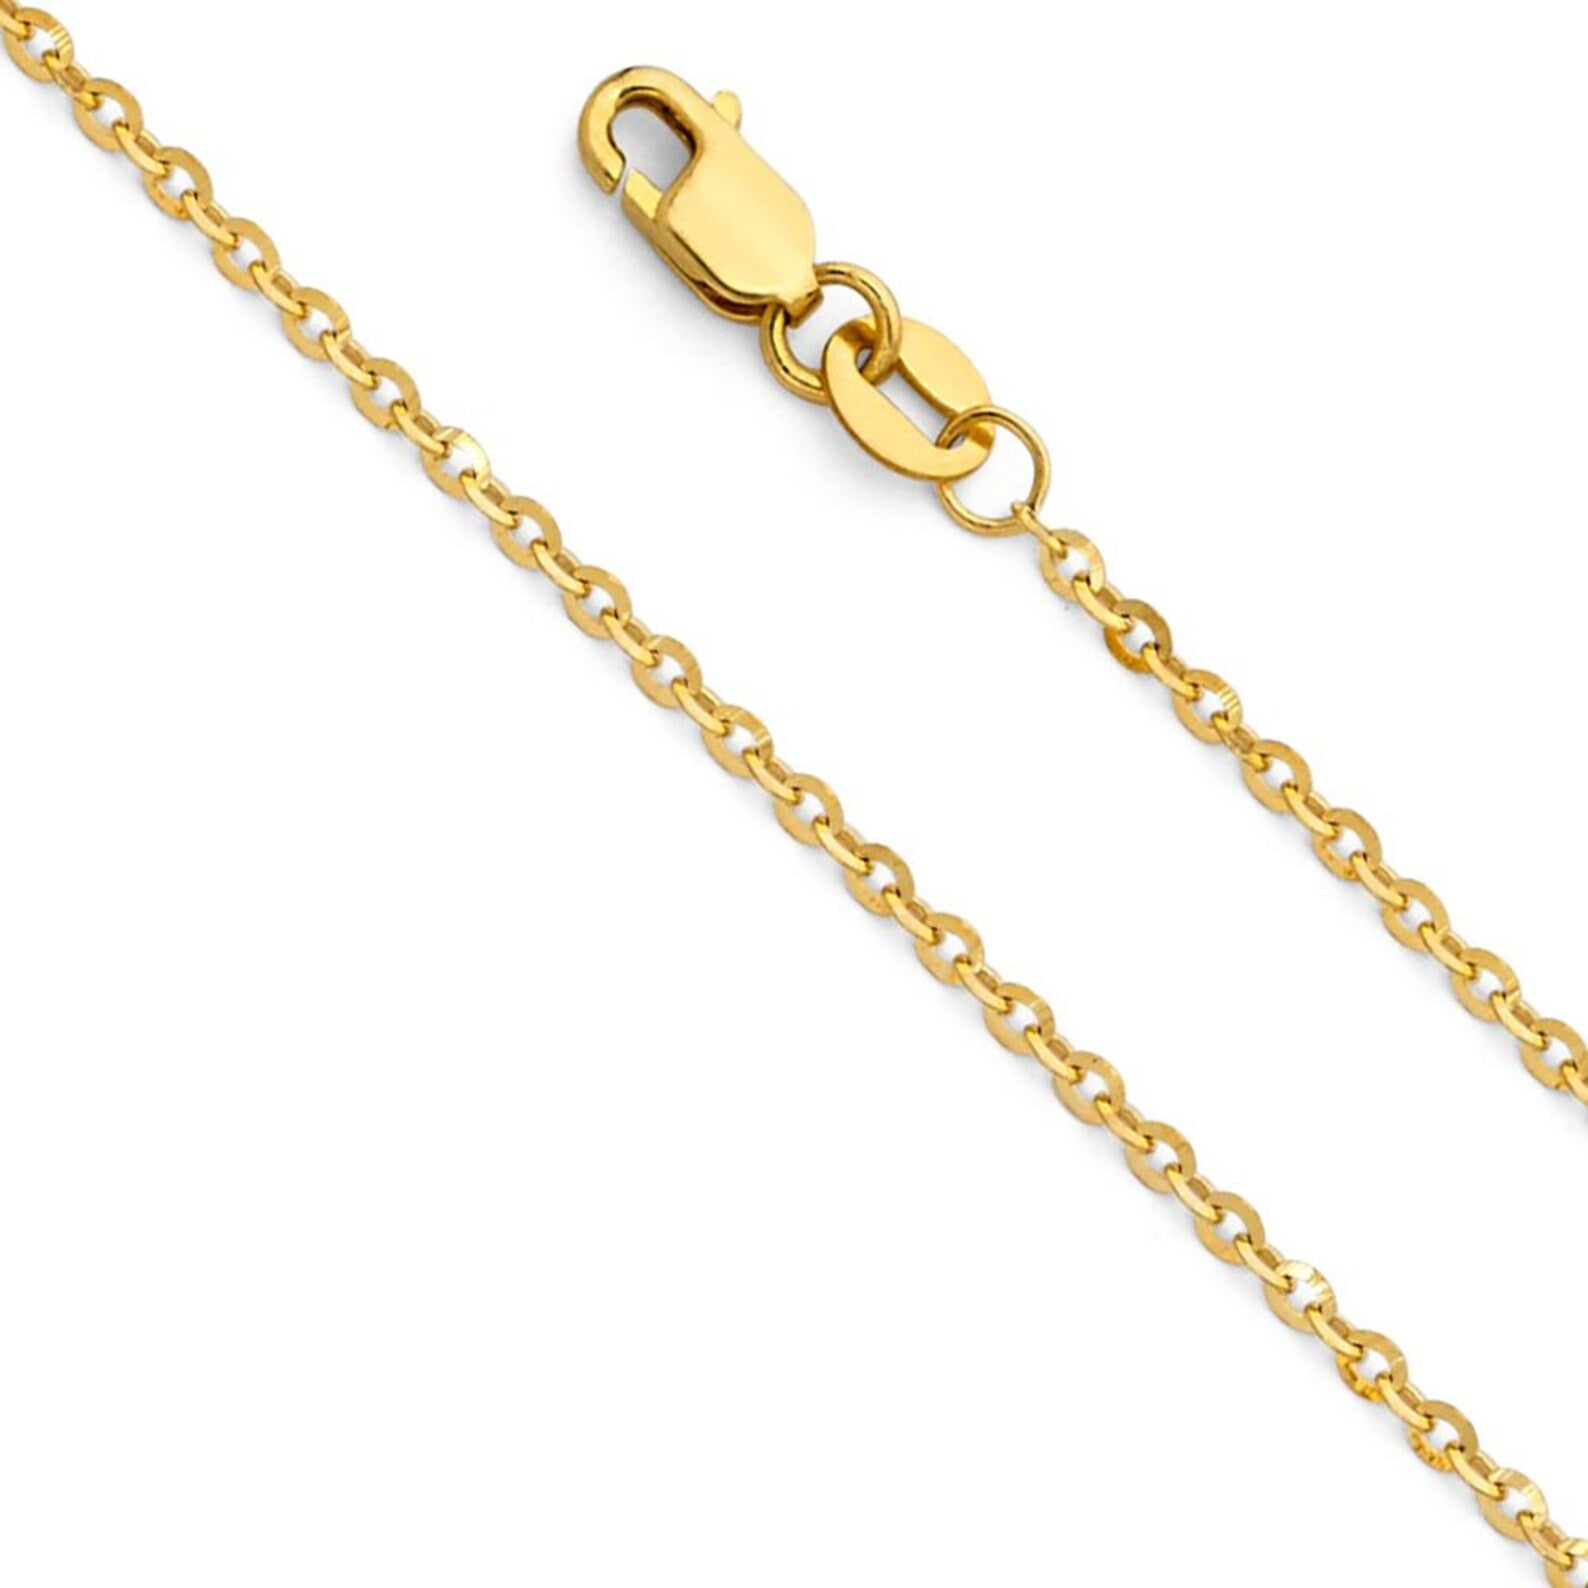 1.6mm 14k Solid Gold Cable Chain Diamond Cut Model-0231 - Charlie & Co. Jewelry